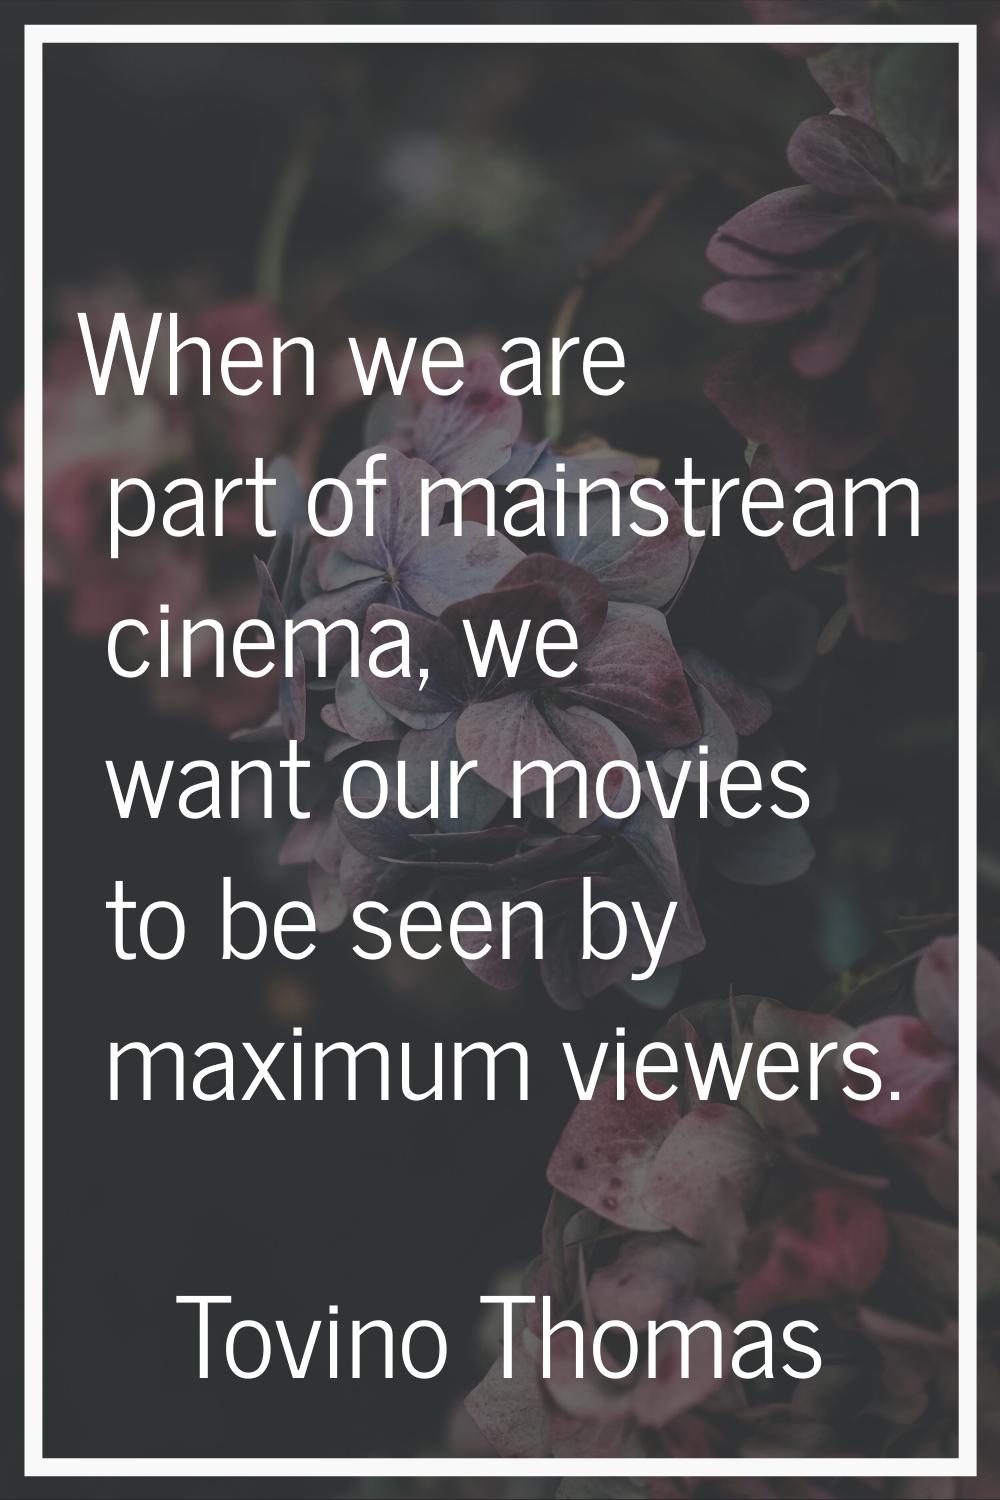 When we are part of mainstream cinema, we want our movies to be seen by maximum viewers.